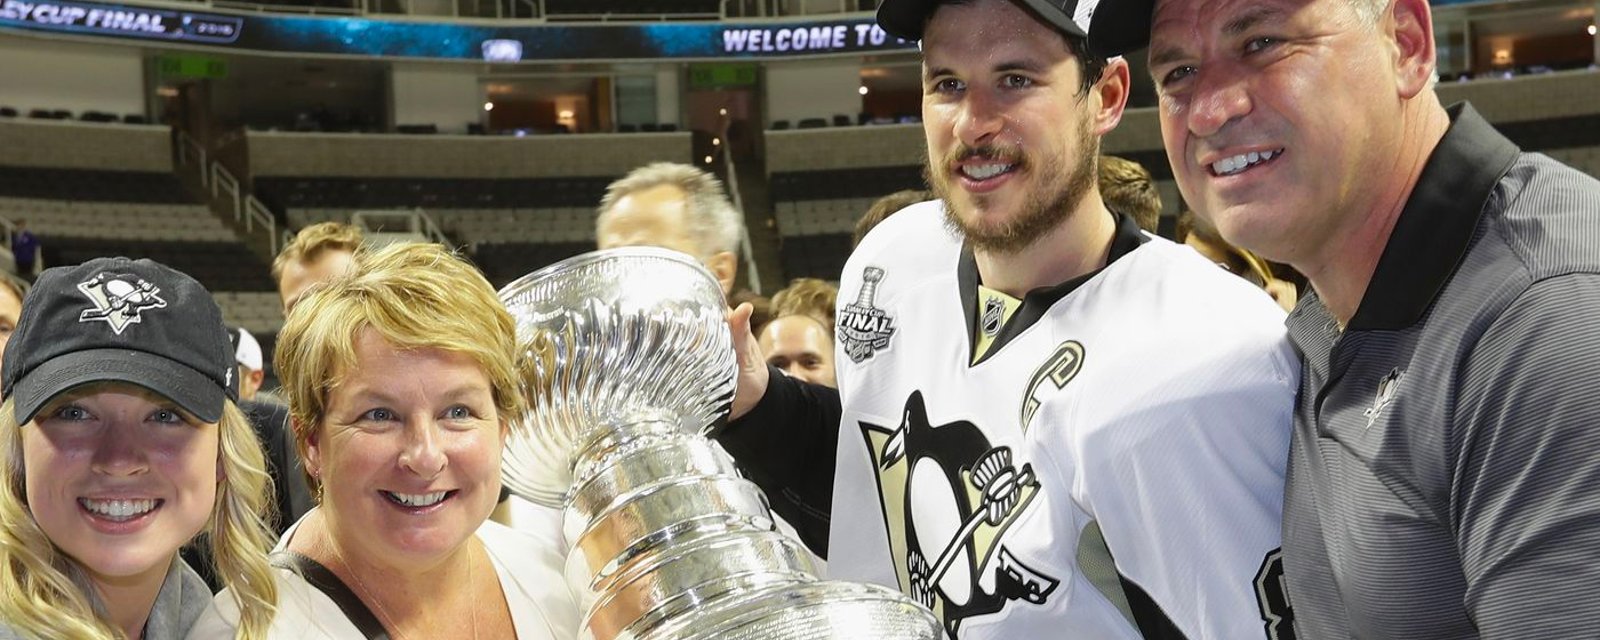 True side of Sidney Crosby’s family revealed during trip to Nova Scotia